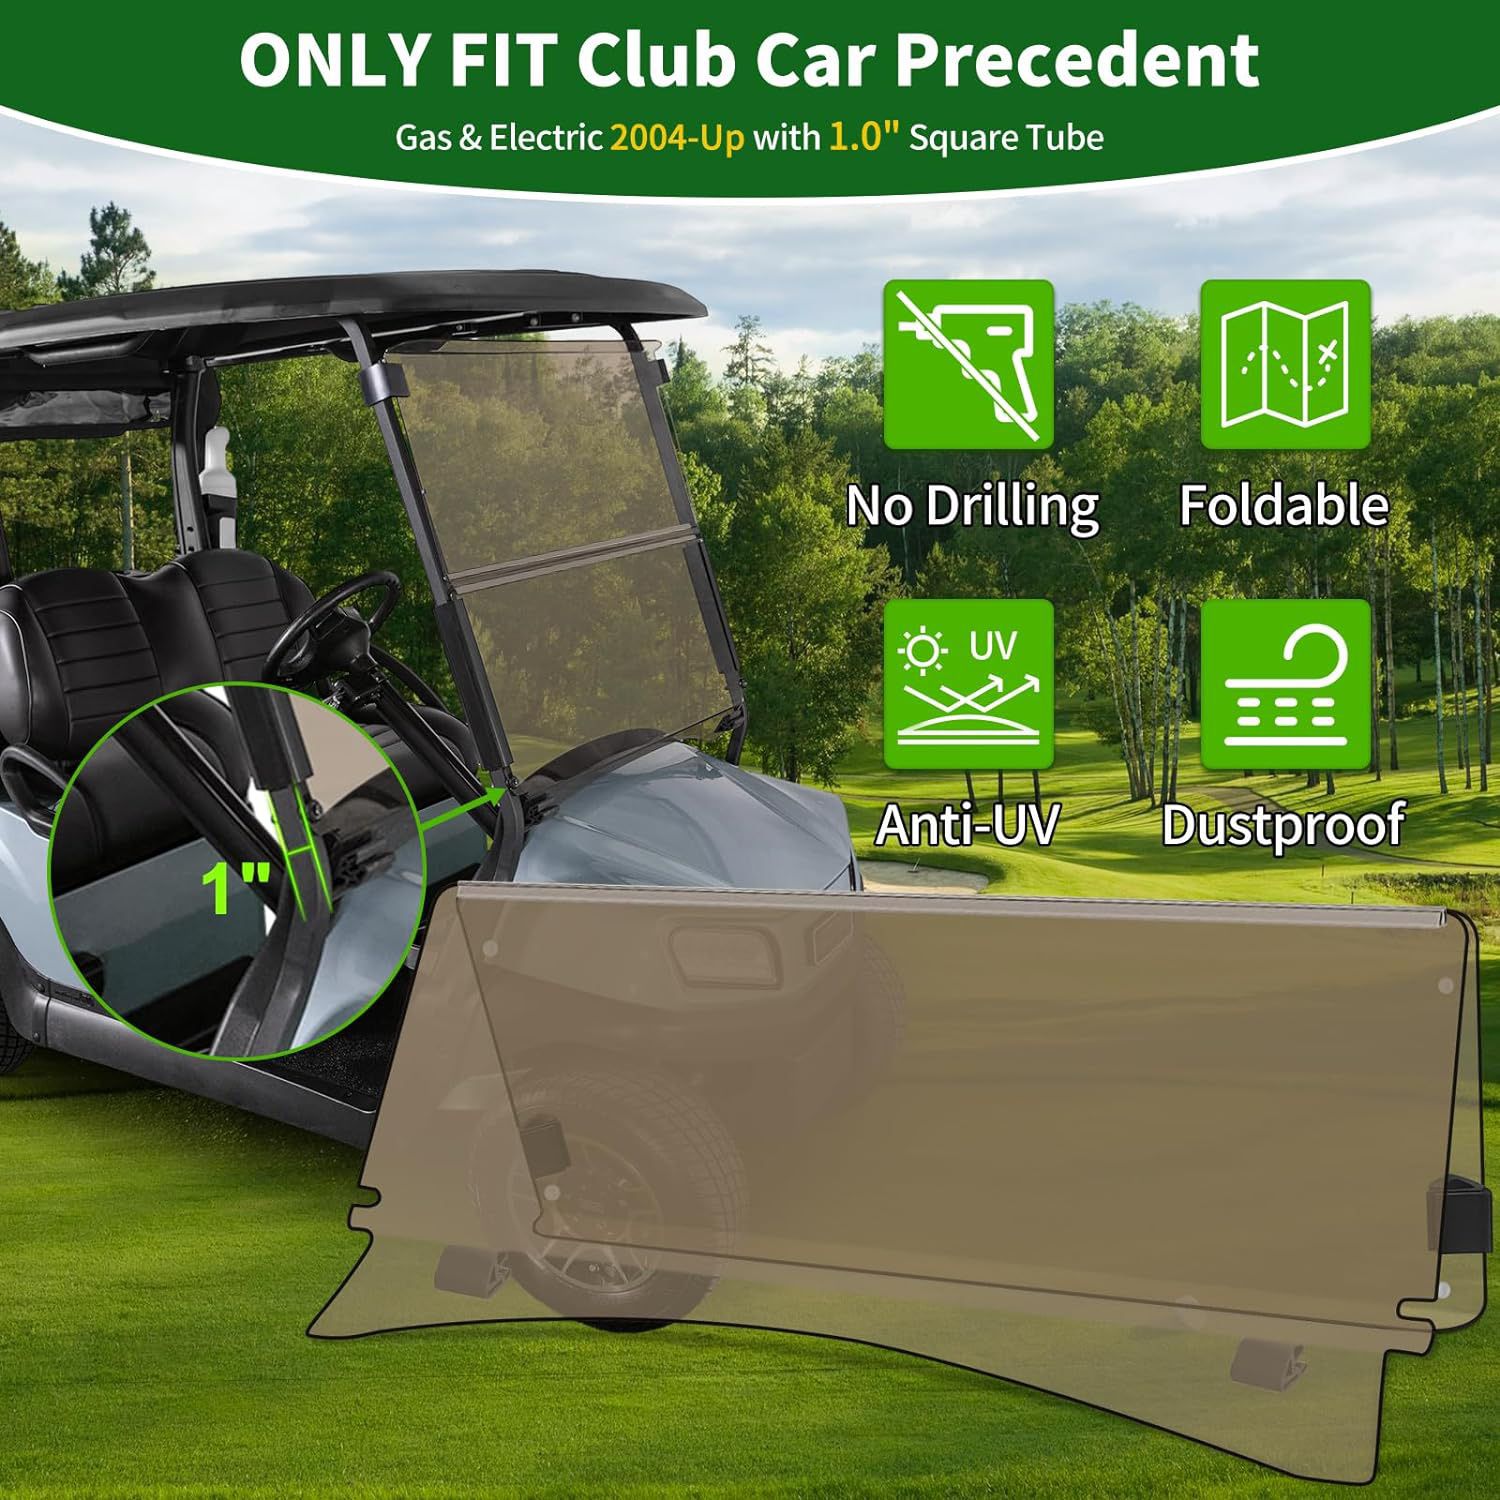 Golf Cart Foldable Windshield 3/16" (5MM) Thicken Only Fits 2004-Up Club Car Precedent with 1"x1" Strut Rail Front Folding Acrylic Windshield Replacem - Selzalot